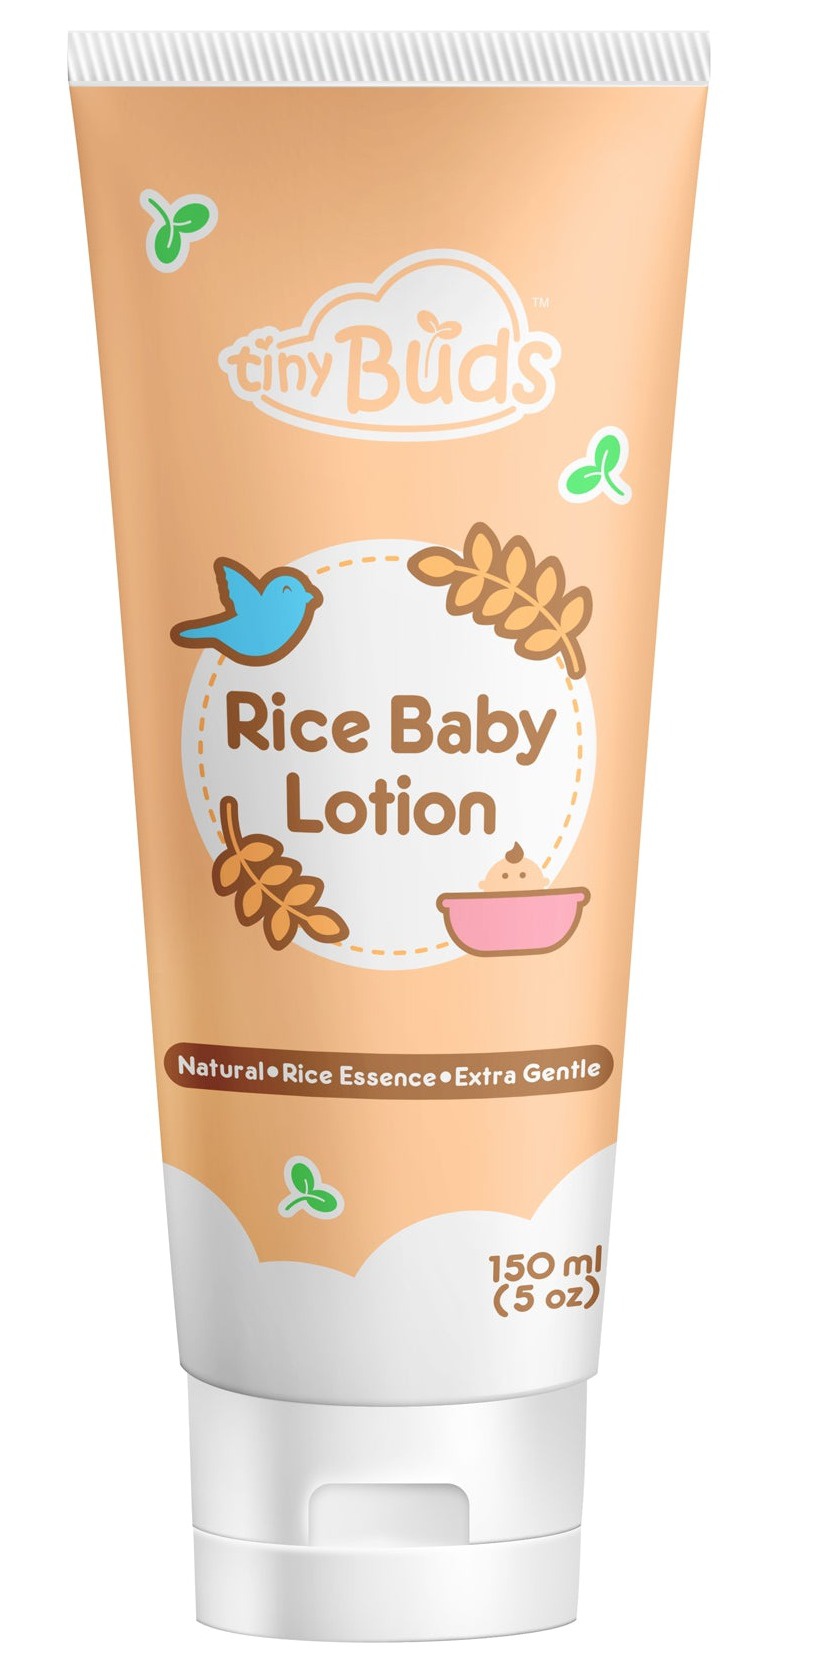 Tiny Buds Rice Baby Lotion